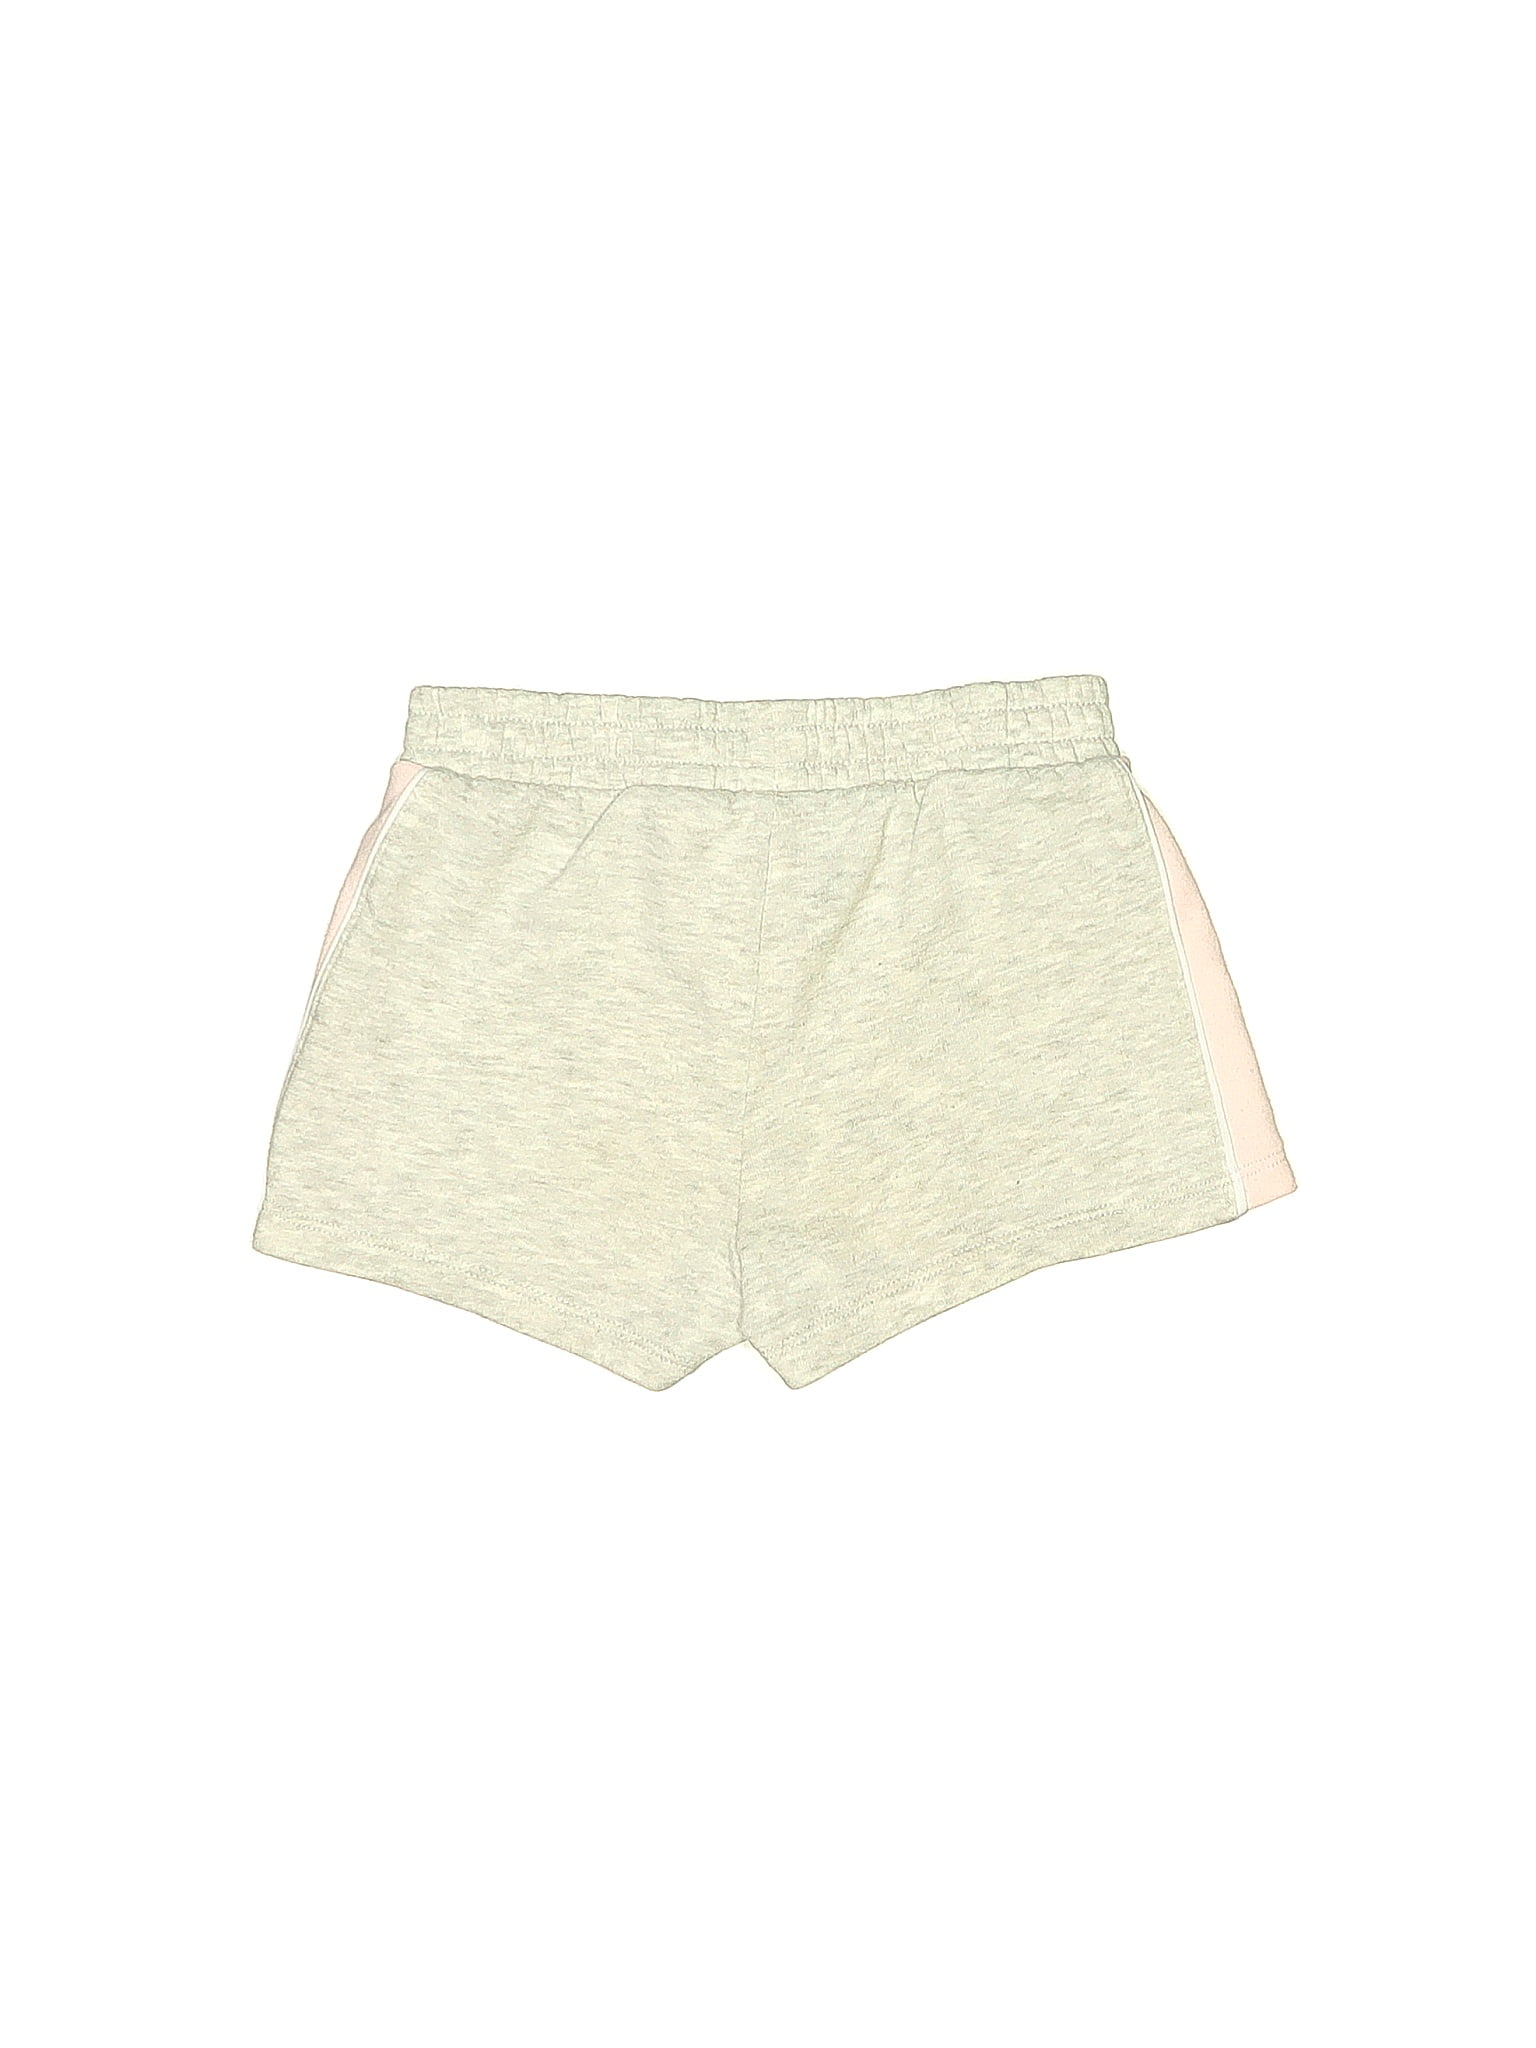 Girls' Shorts: New & Used On Sale Up To 90% Off